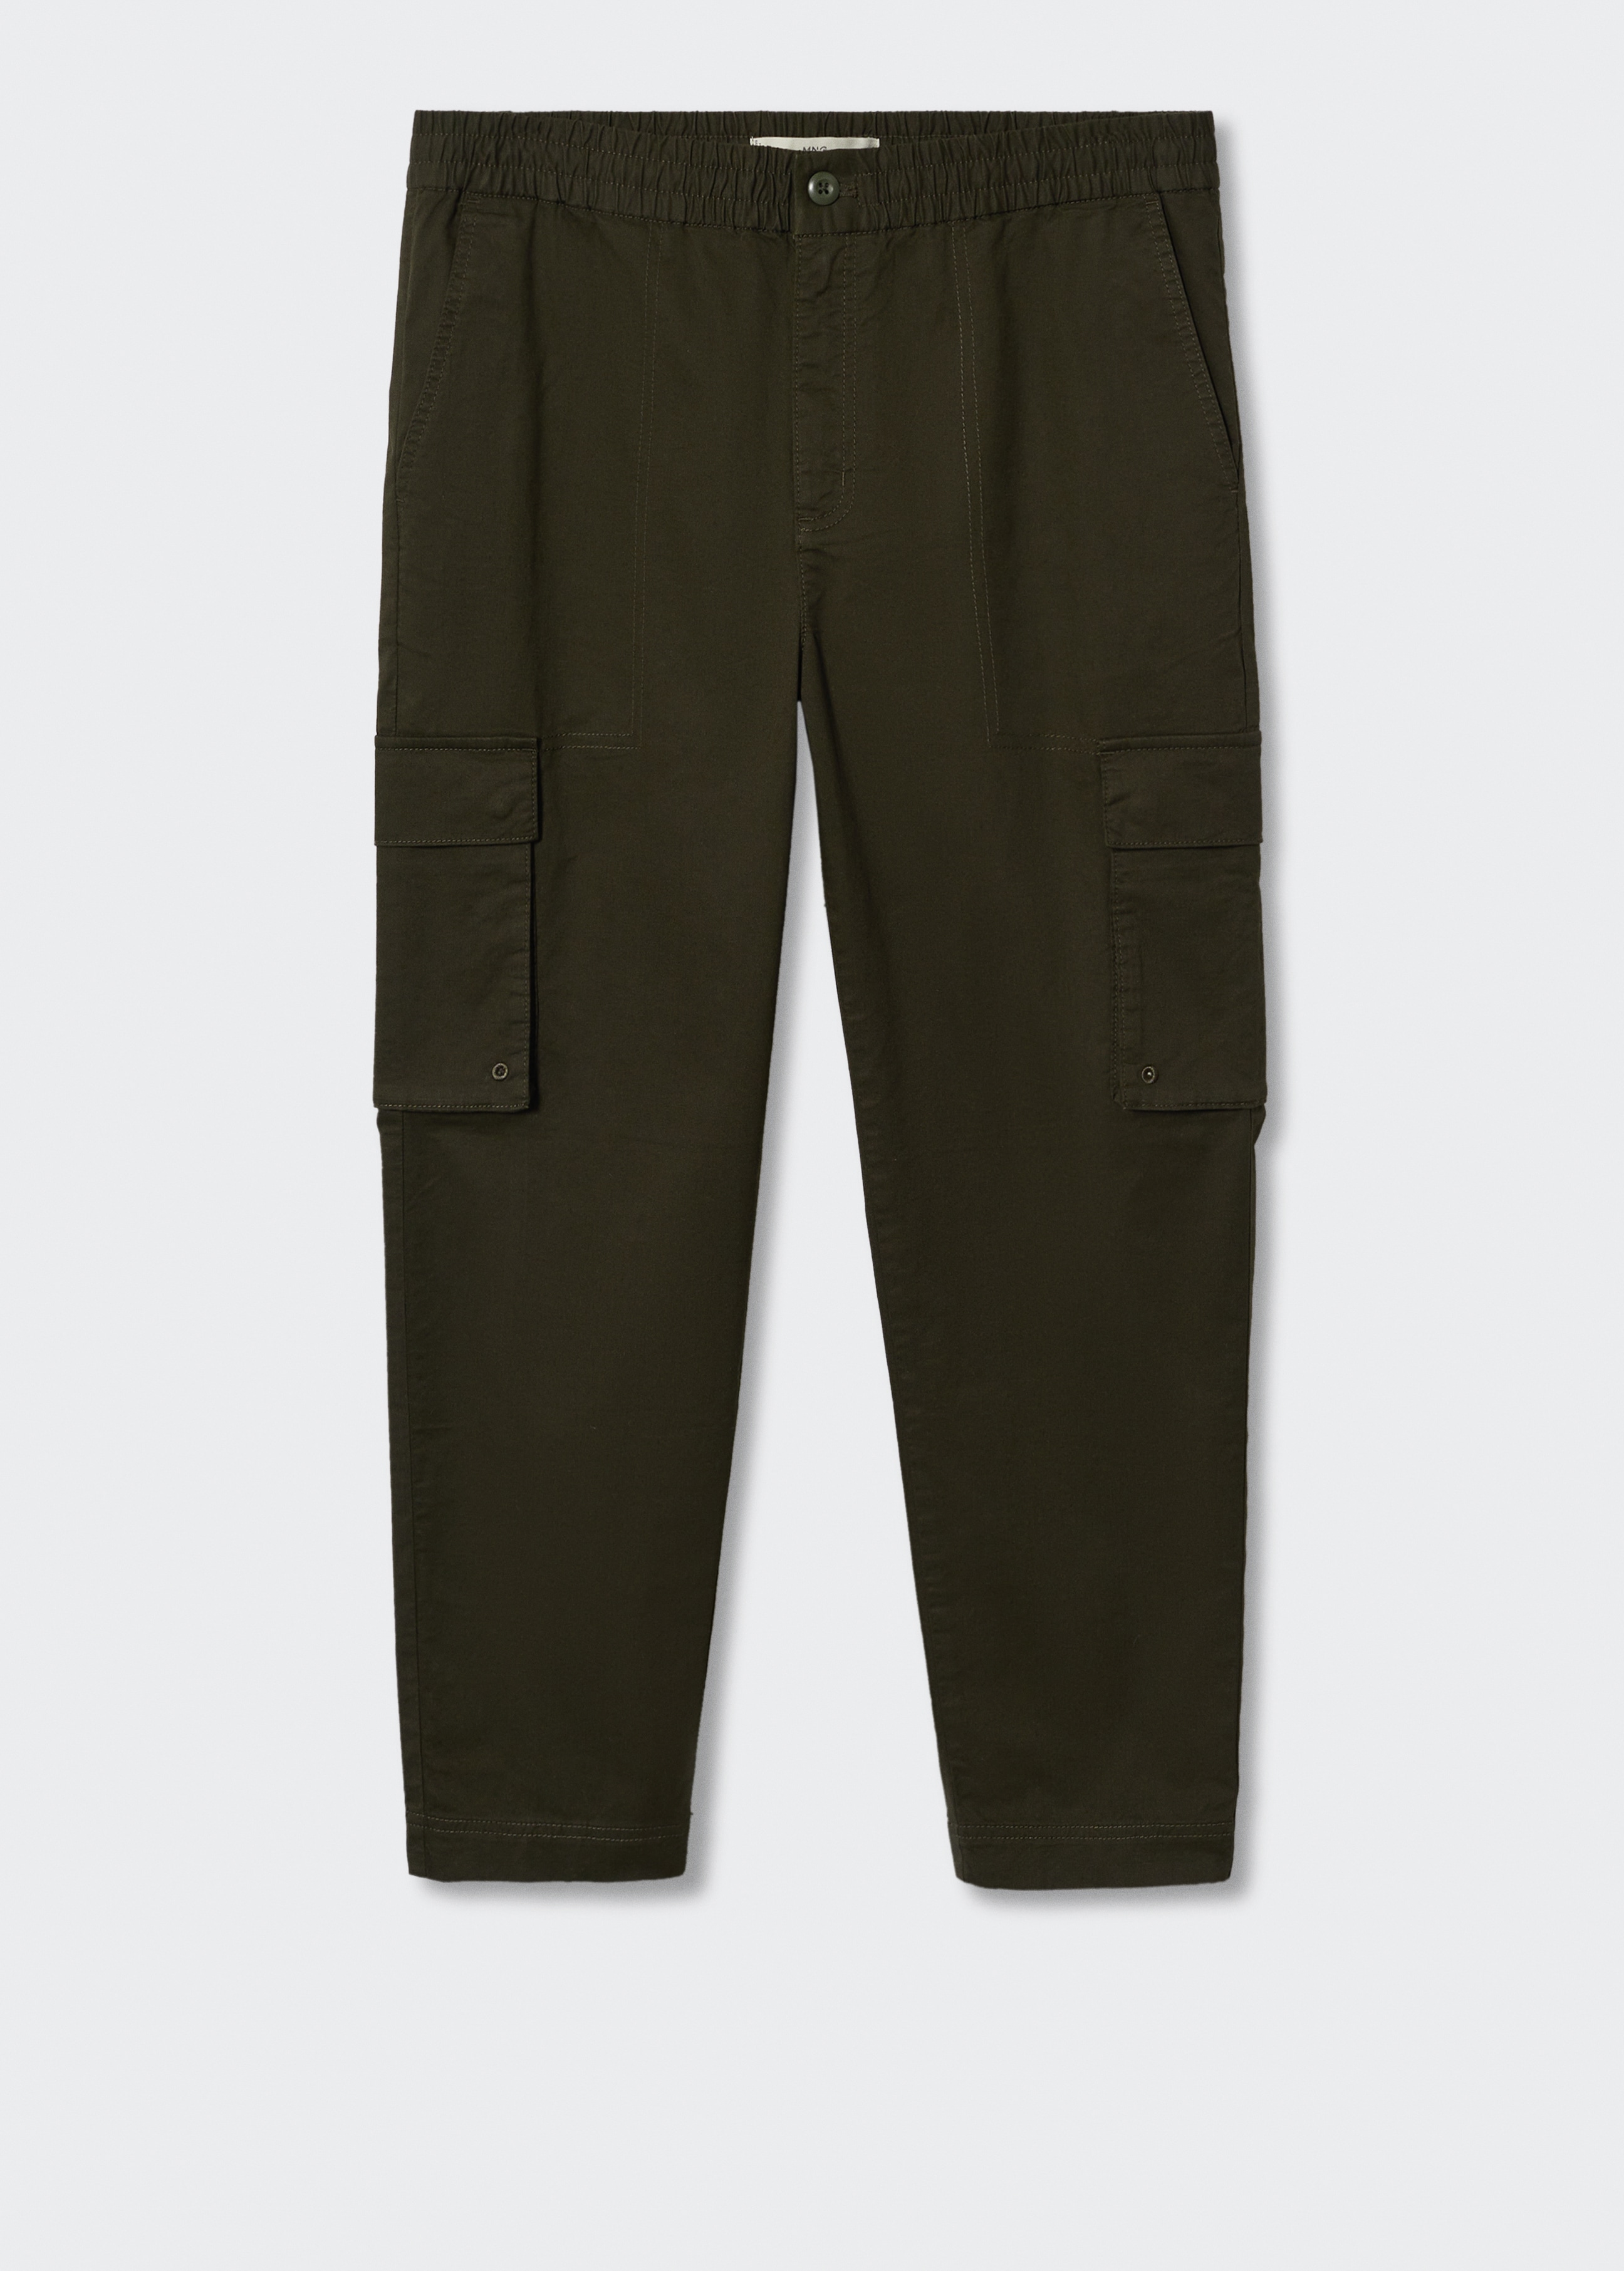 Cotton cargo pants - Article without model